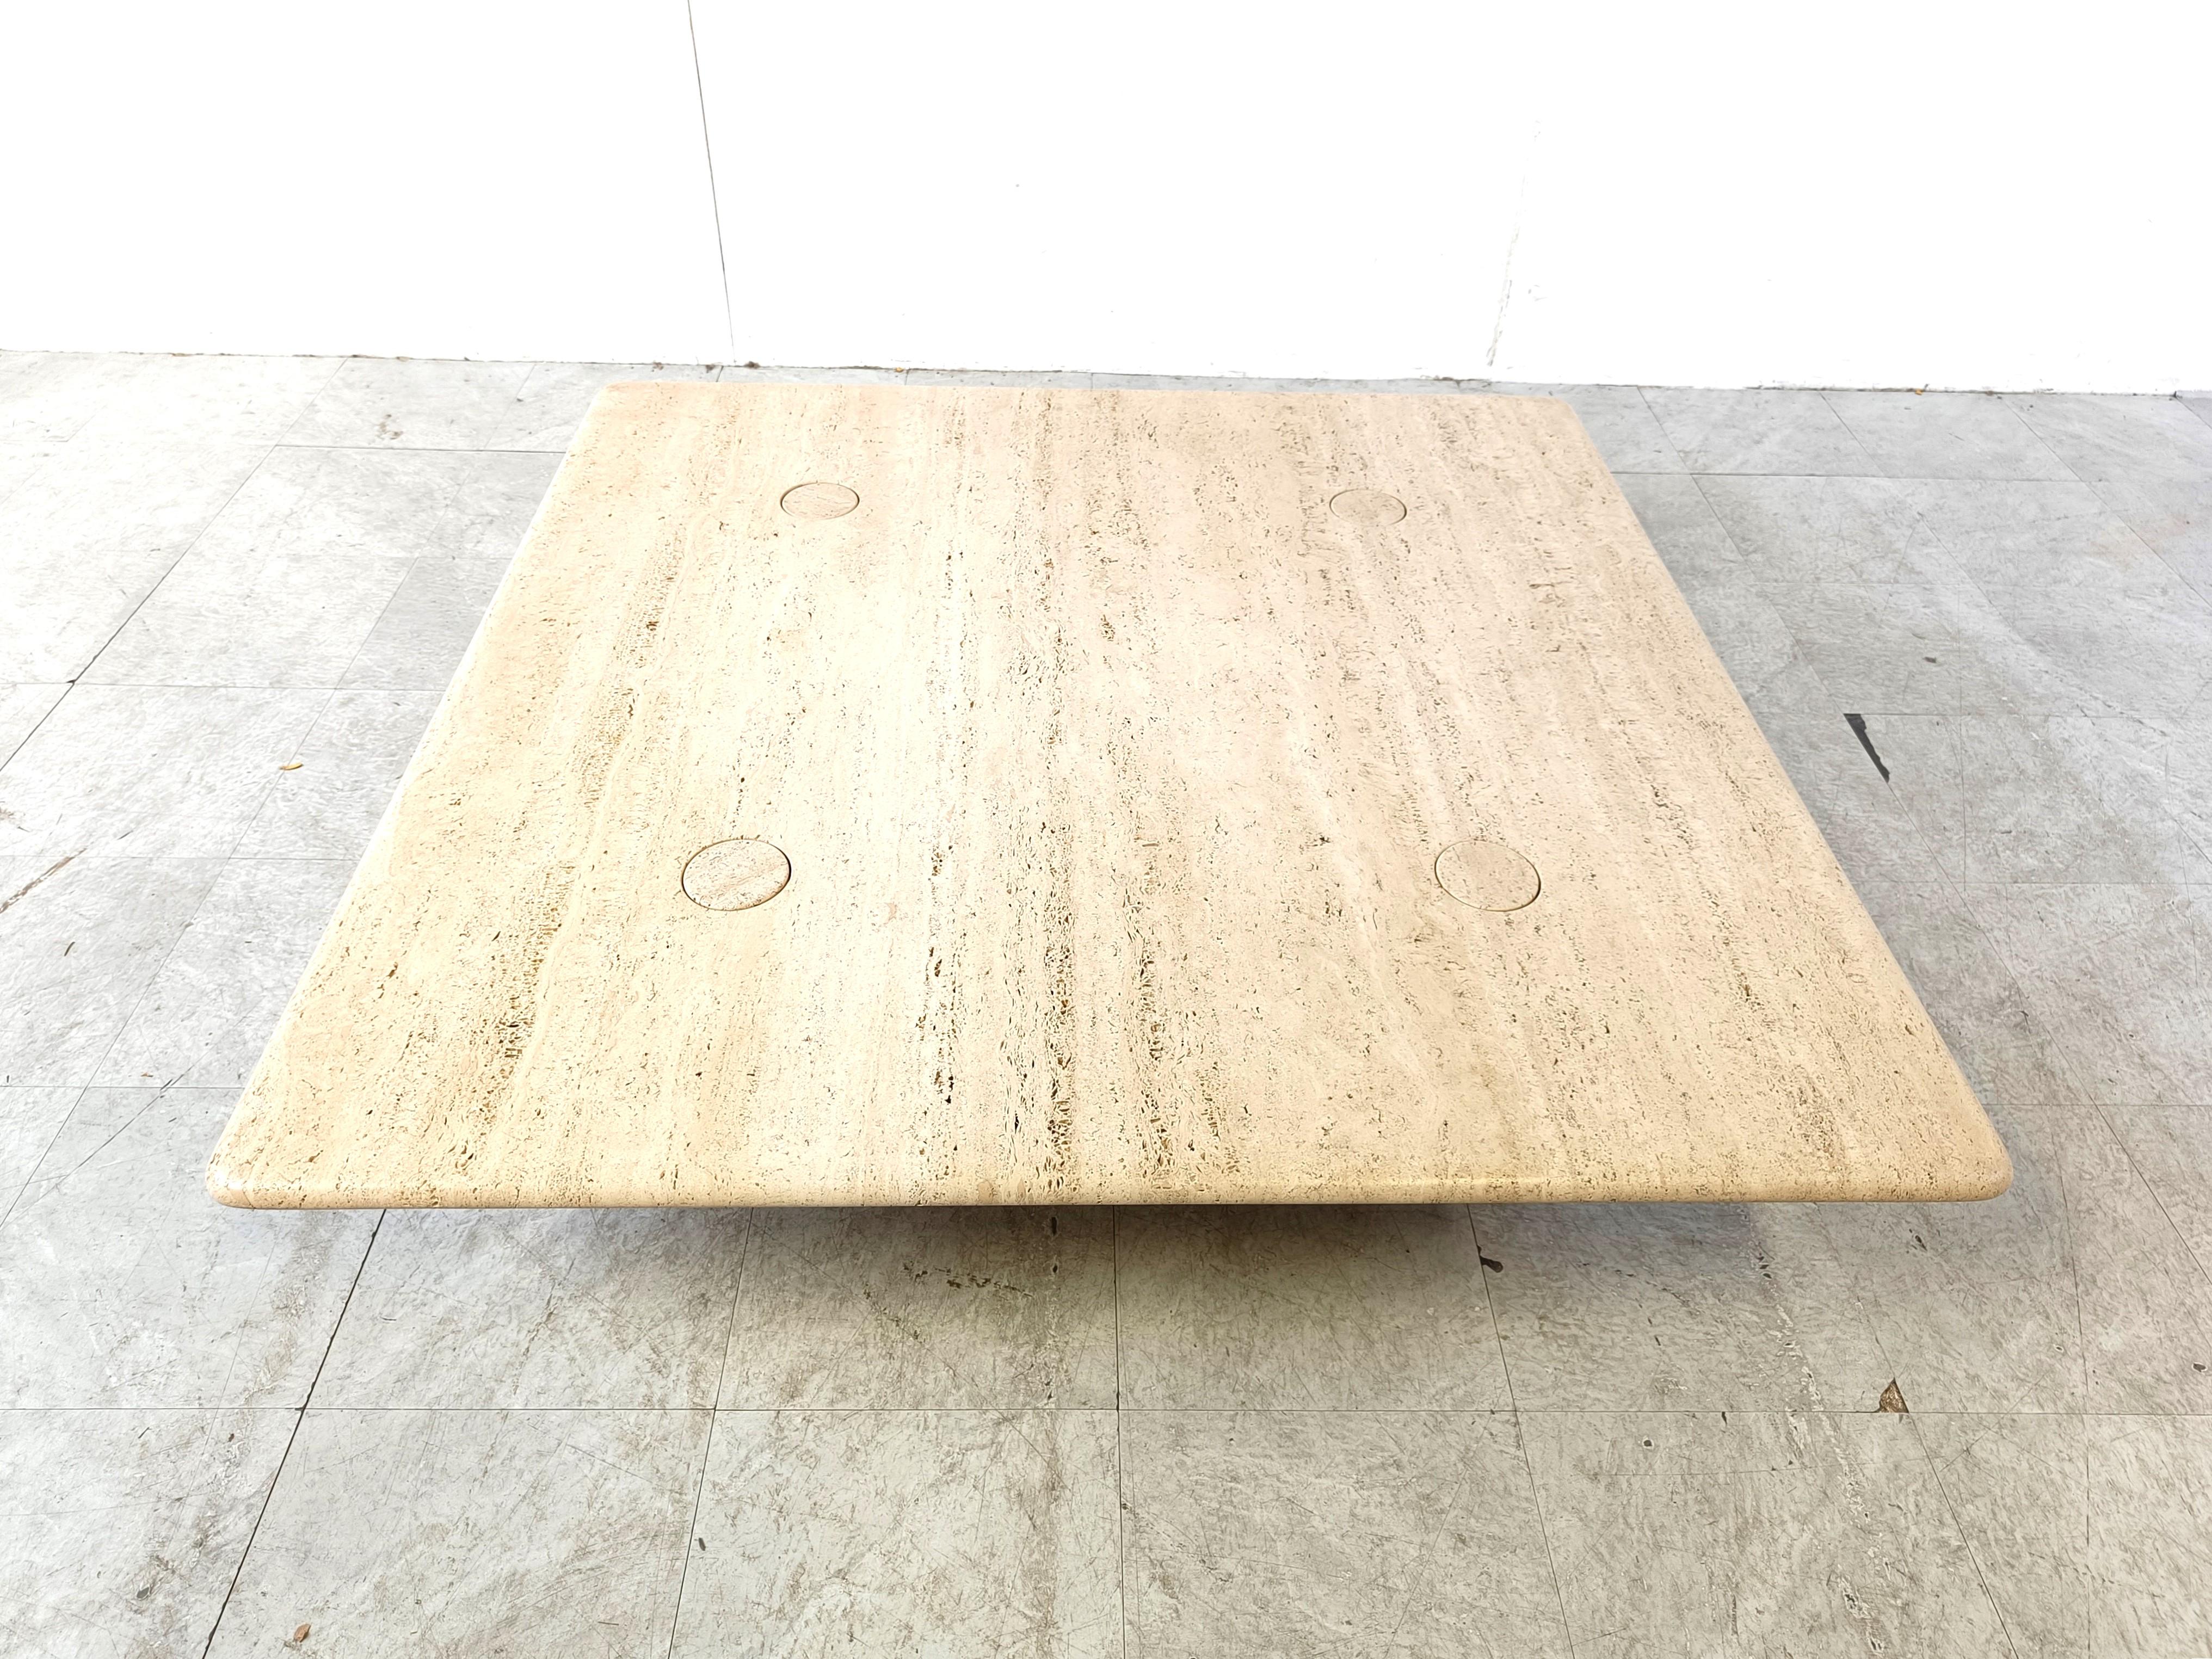 Timeless travertine coffee table with interlocking legs designed by Angelo Mangiarotti for Up&Up.

Beautiful travertine stone top.

Xl model

Good condition

1970s - Italy

Height: 28cm
Width x depth: 120cm

Ref.: 347979